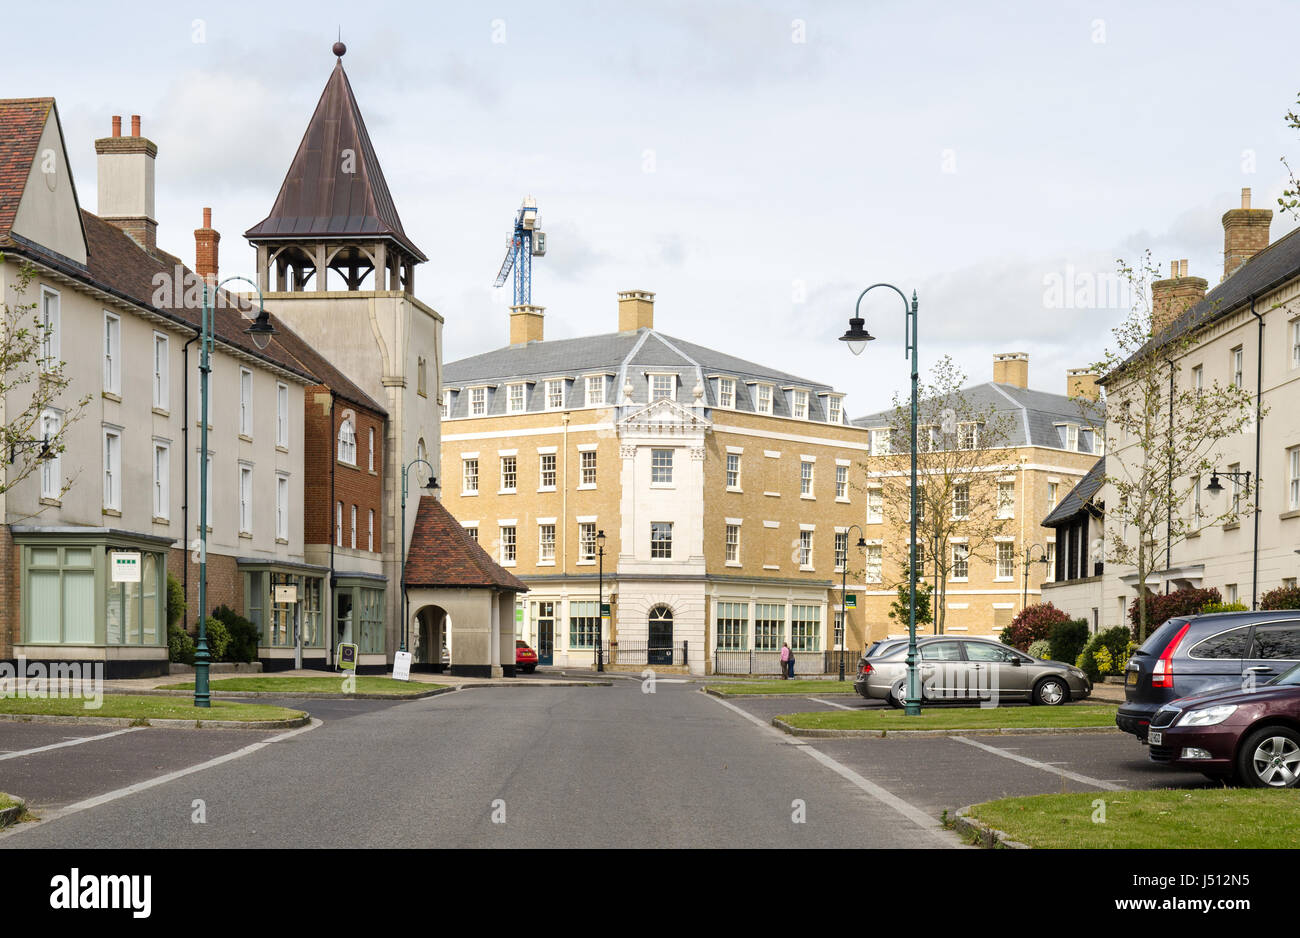 Houses and apartment buildings in Poundbury, the Price of Wales's planned new town on the edge of Dorchester in Dorset. Stock Photo